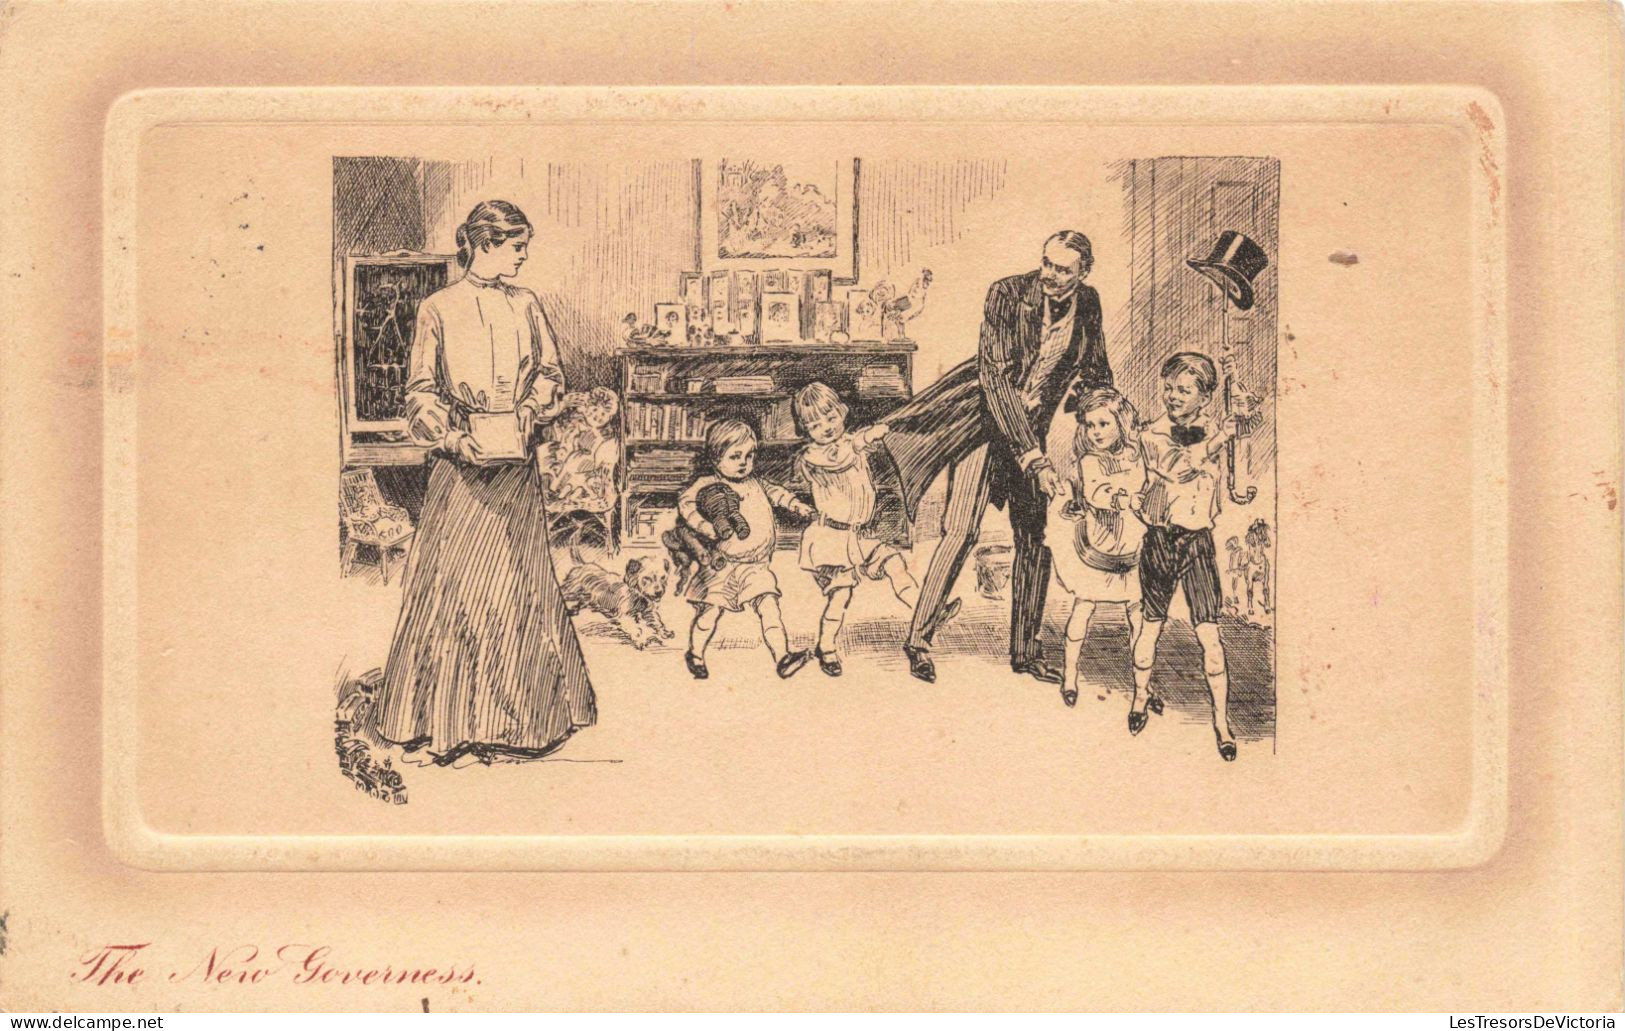 ILLUSTRATION NON SIGNE - The New Governess - Carte Postale Ancienne - Voor 1900